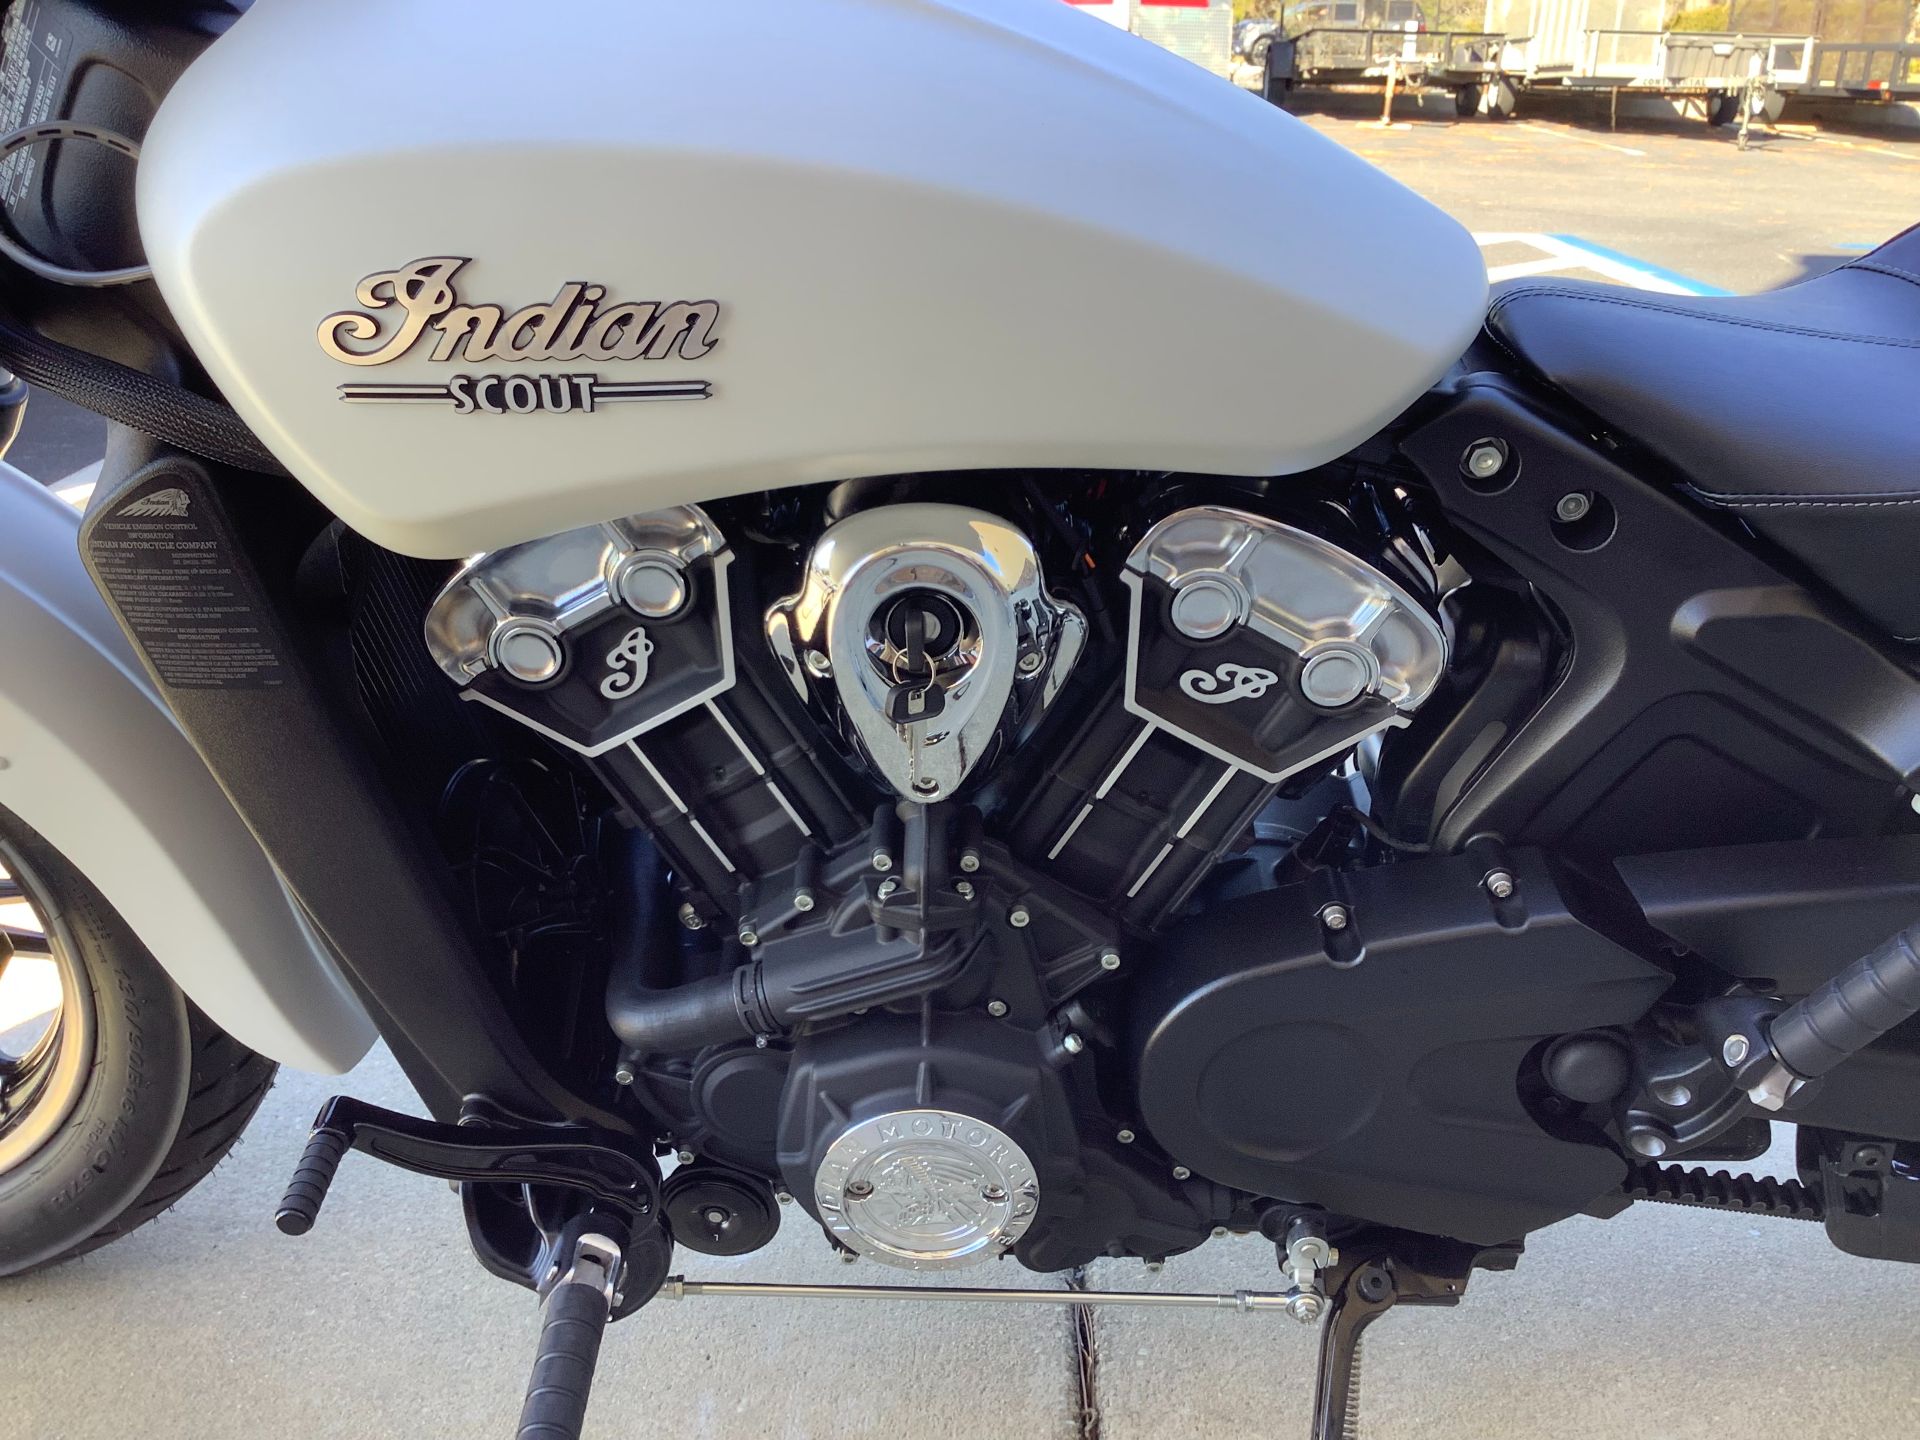 2021 Indian SCOUT in Panama City Beach, Florida - Photo 11